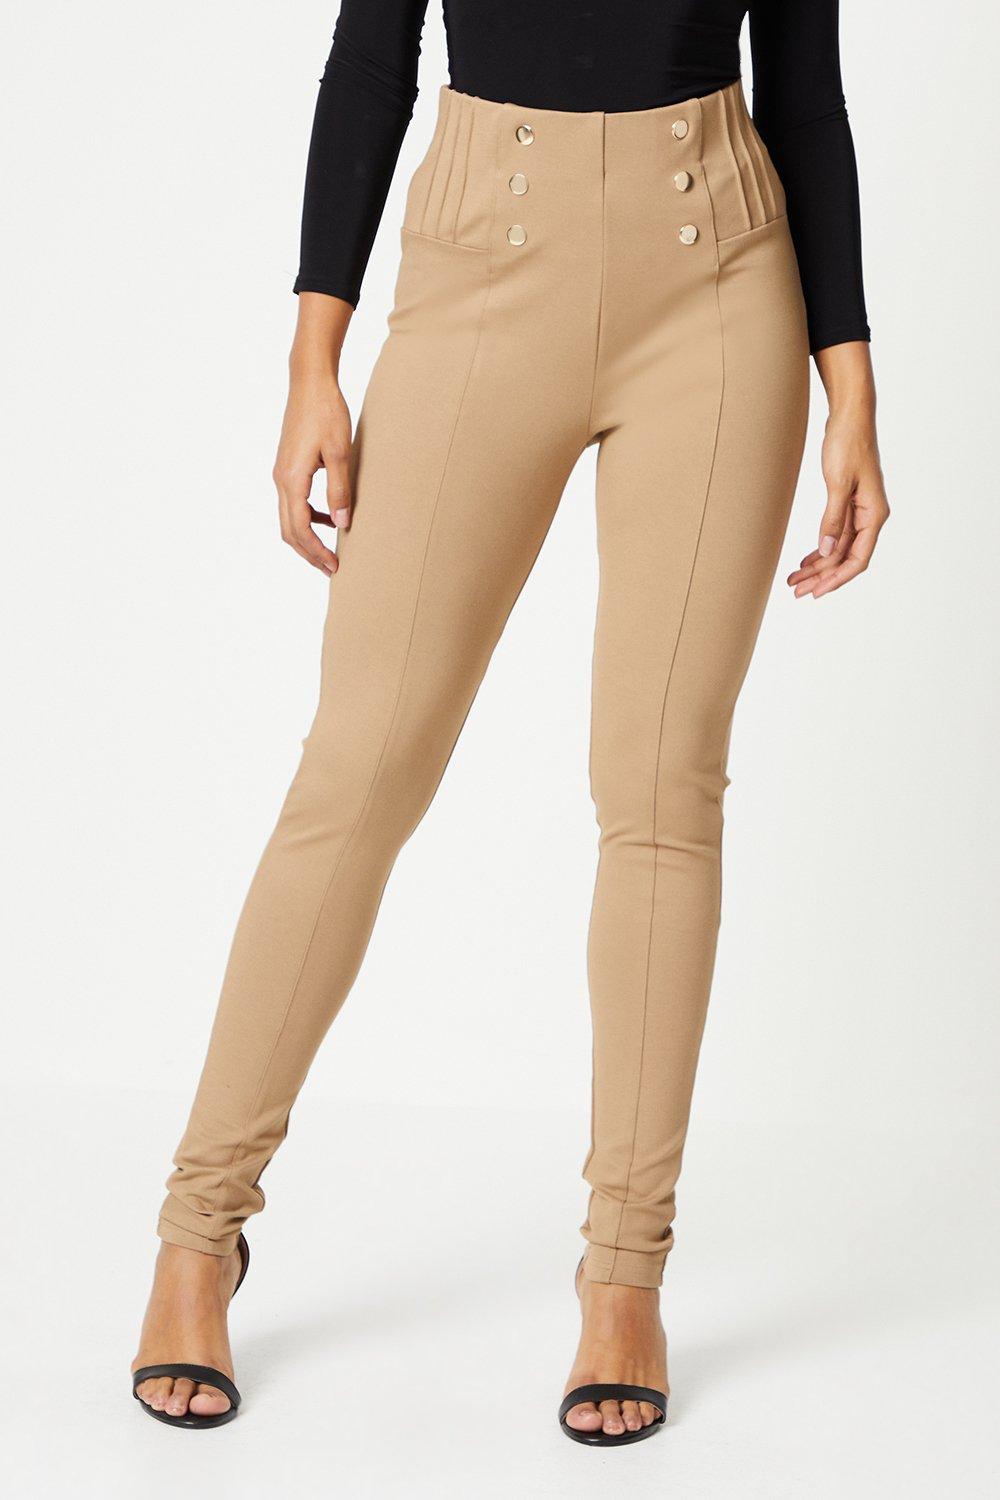 Women’s Tall Button Front Pleat Skinny Trouser - camel - 14